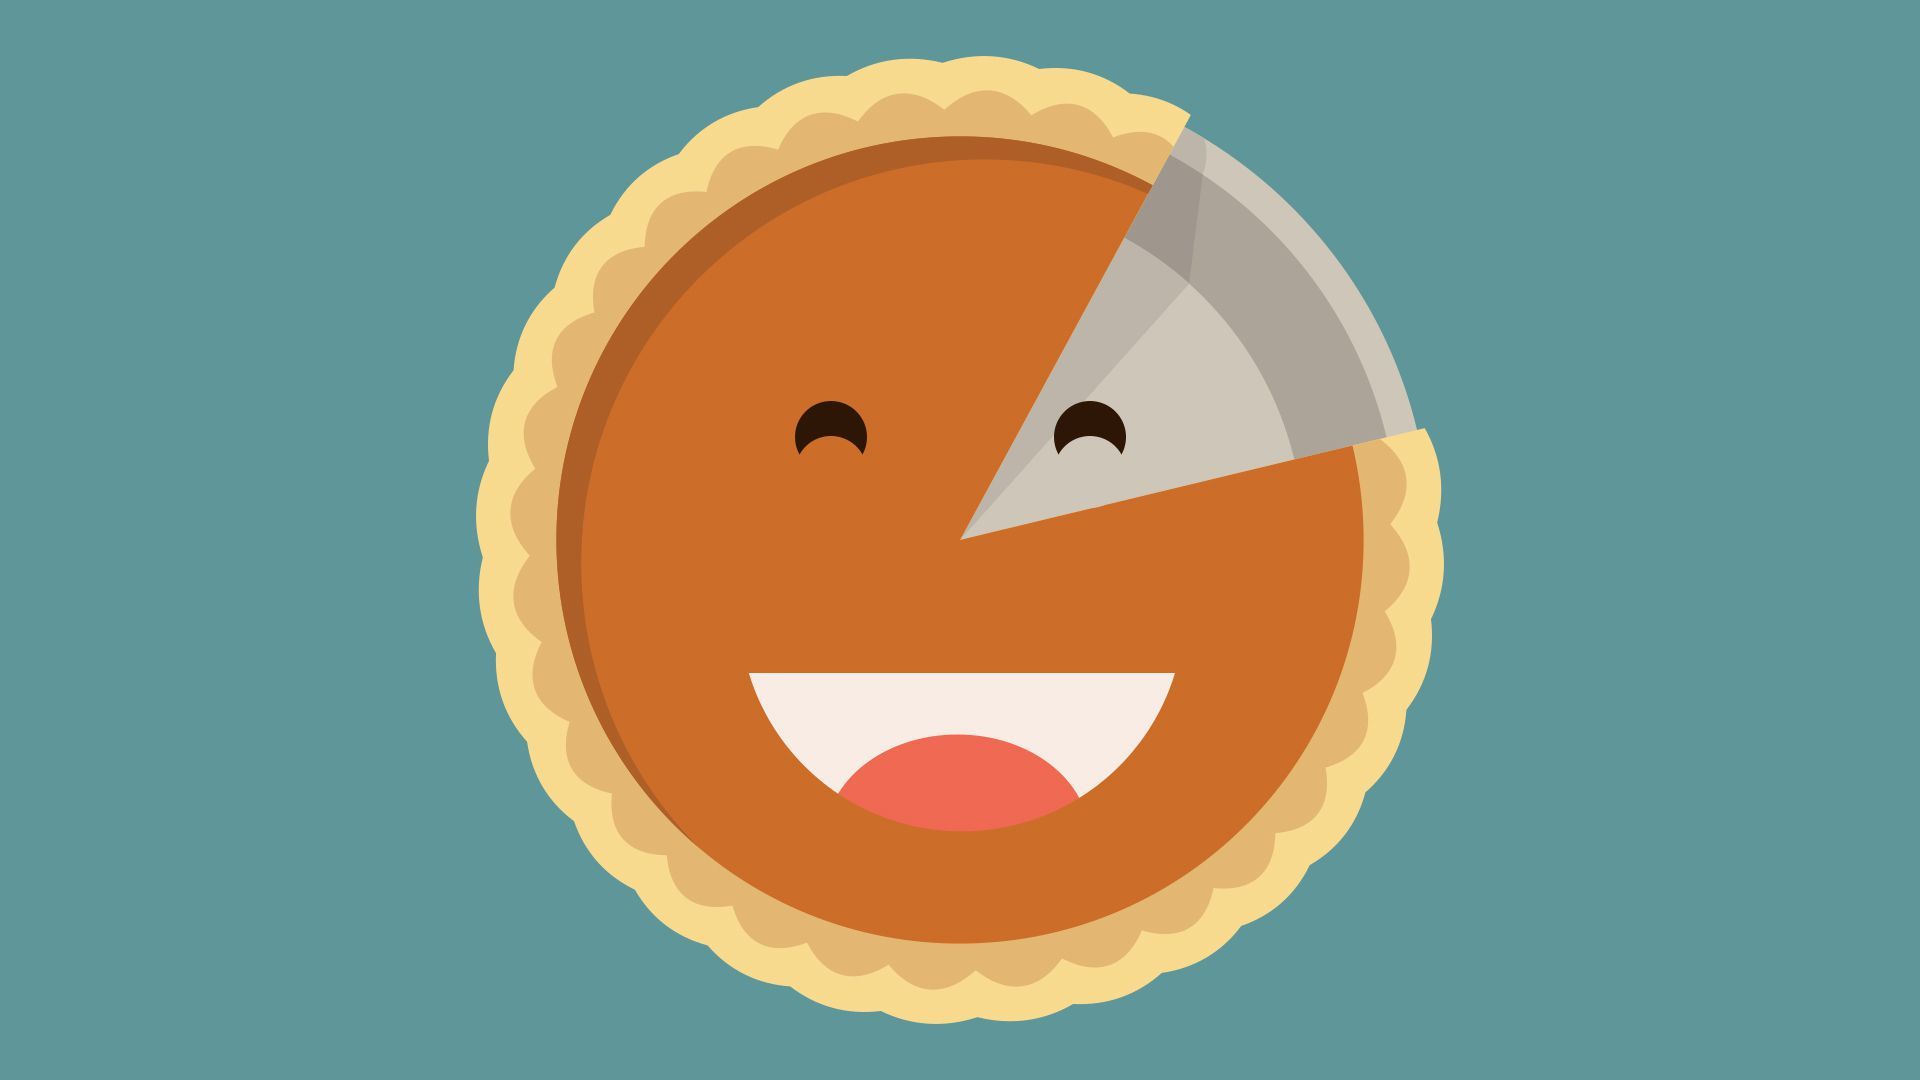 Illustration of a pumpkin pie with a happy face.